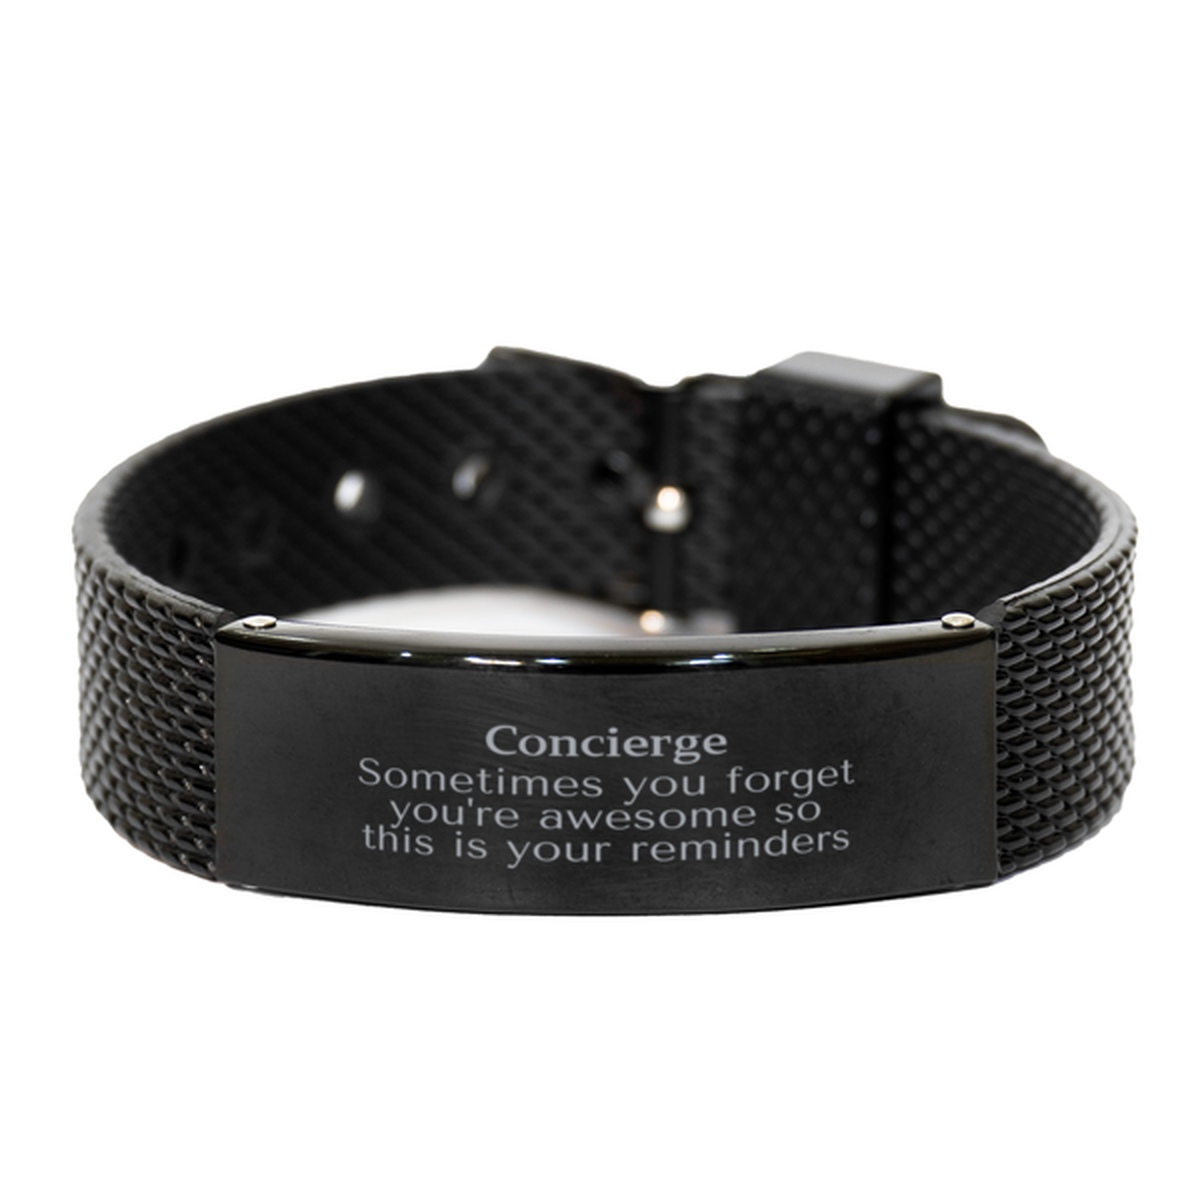 Sentimental Concierge Black Shark Mesh Bracelet, Concierge Sometimes you forget you're awesome so this is your reminders, Graduation Christmas Birthday Gifts for Concierge, Men, Women, Coworkers